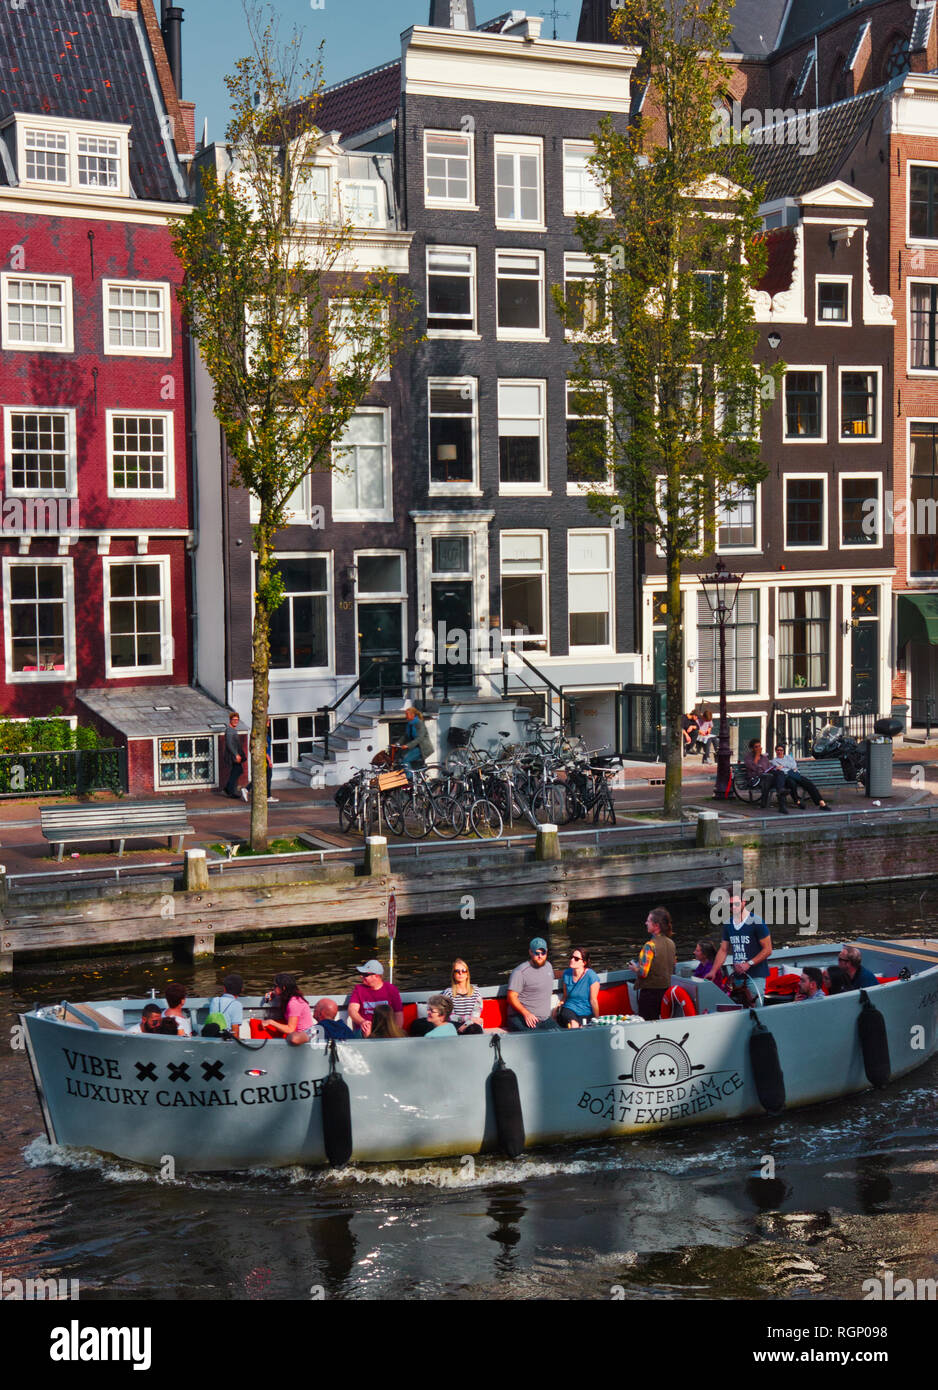 Luxury canal cruise and canal houses, Amsterdam, Netherlands, Europe Stock Photo